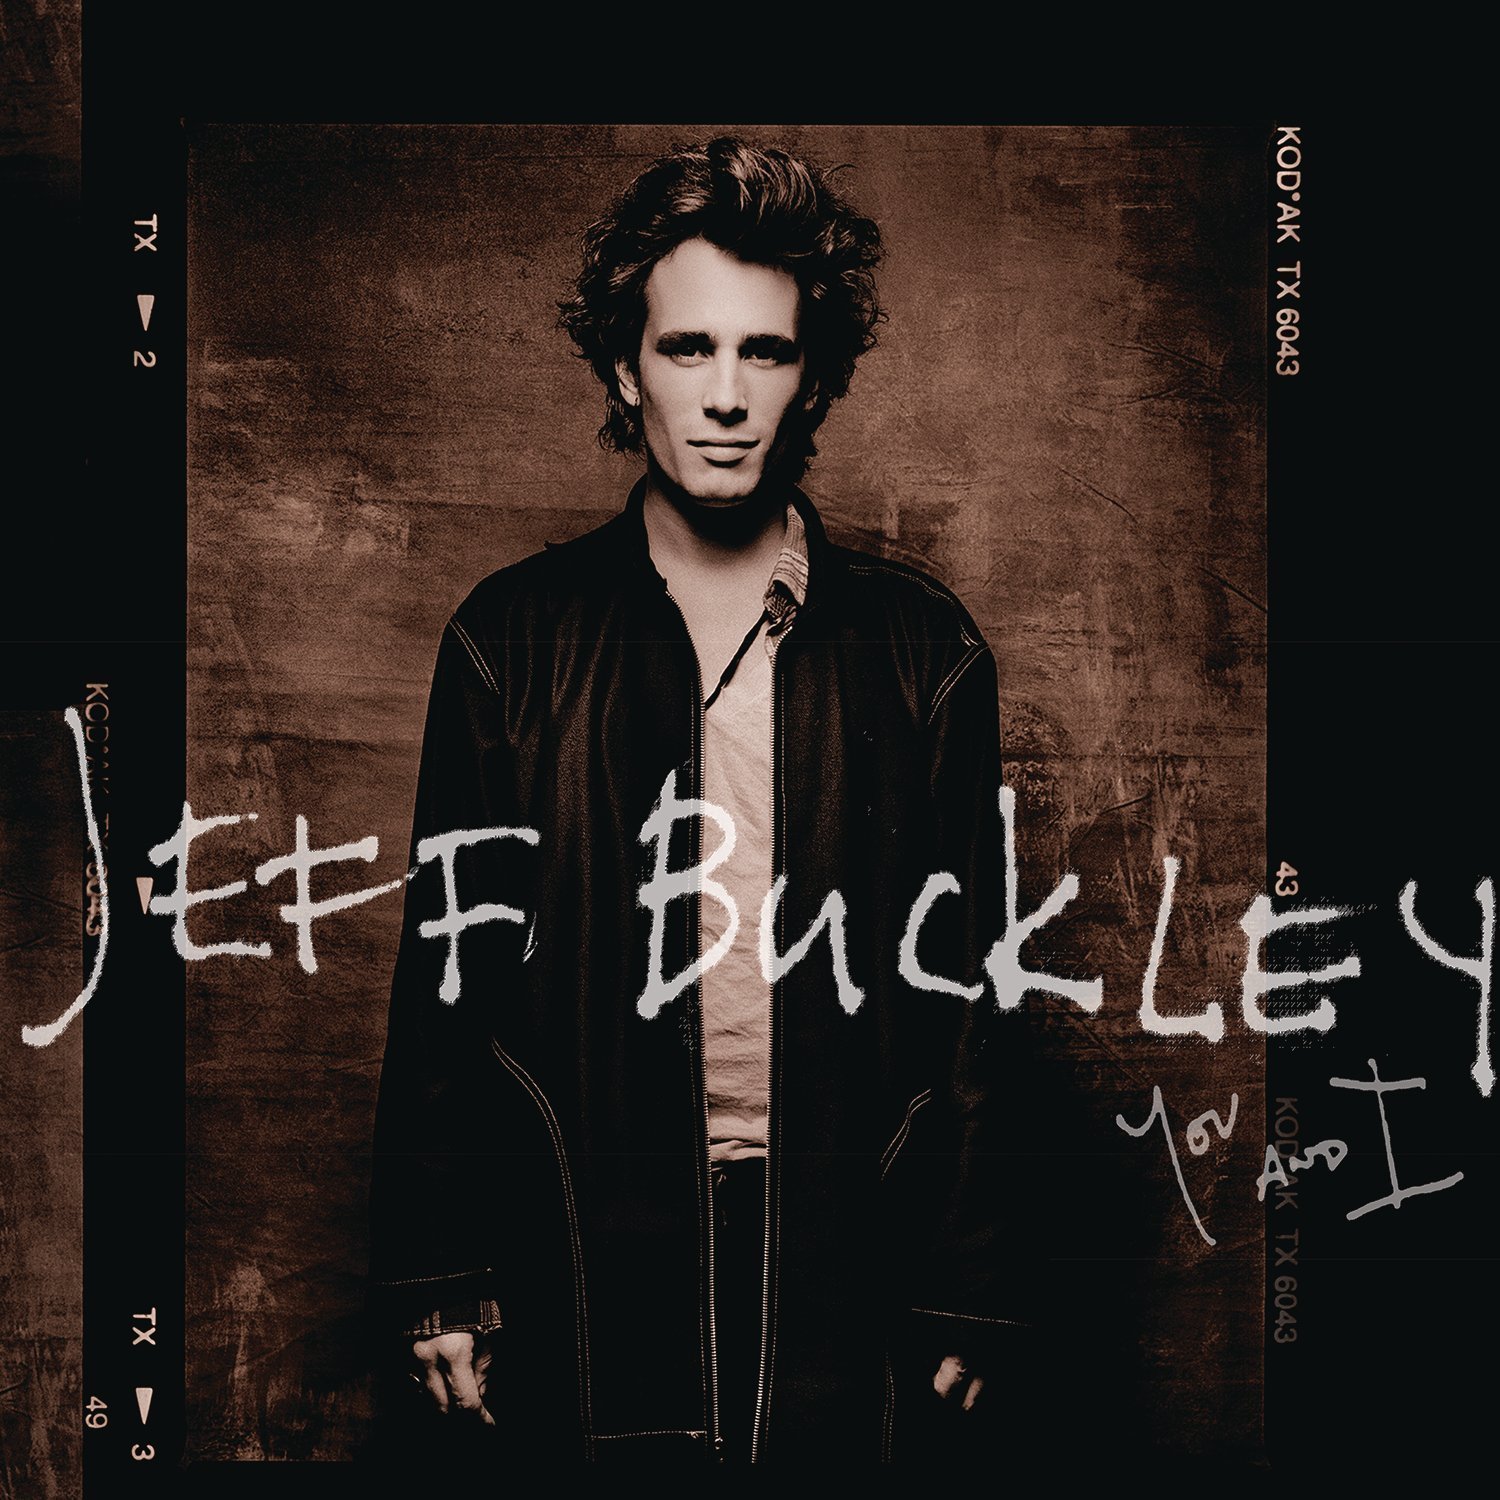 Jeff Buckley You and I (2 LP)